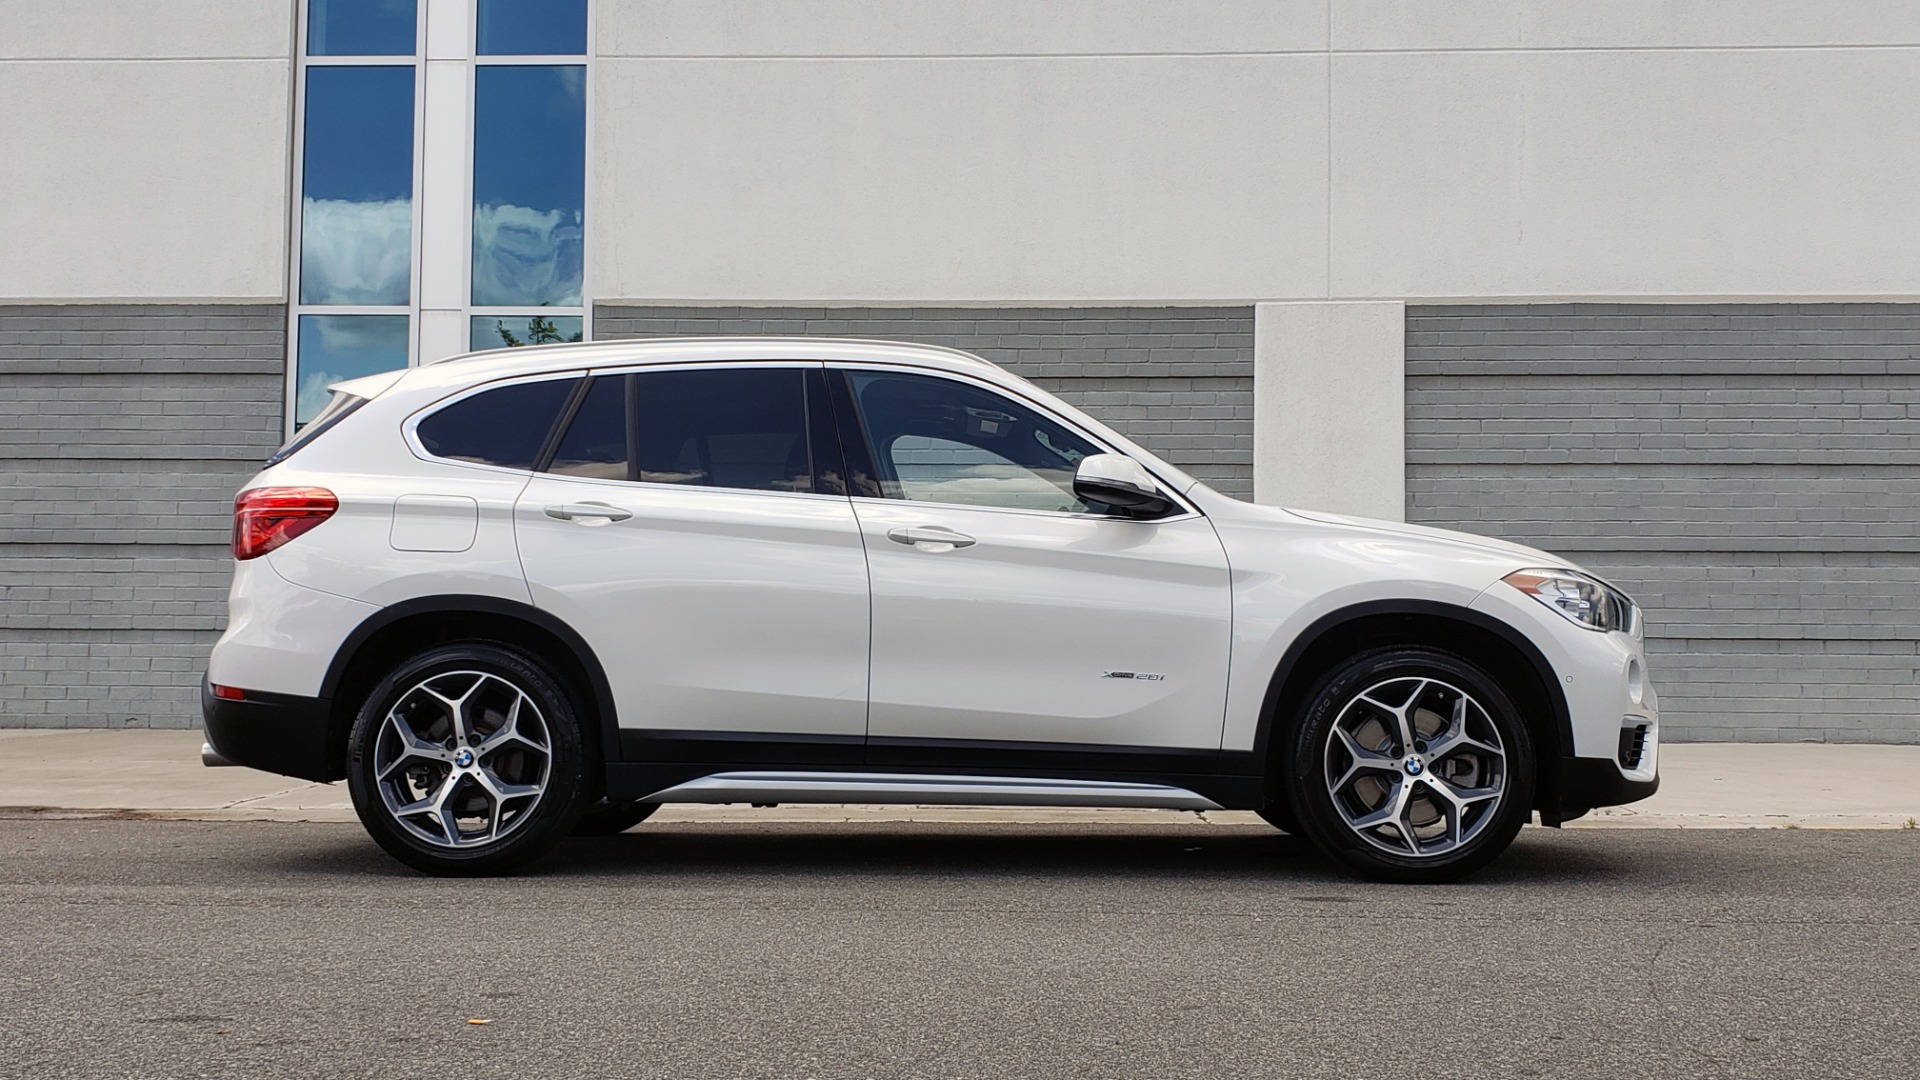 Used 2018 BMW X1 XDRIVE28I / NAV / CONV PKG / HTD SEATS / APPLE / PANO-ROOF / REARVIEW for sale Sold at Formula Imports in Charlotte NC 28227 9